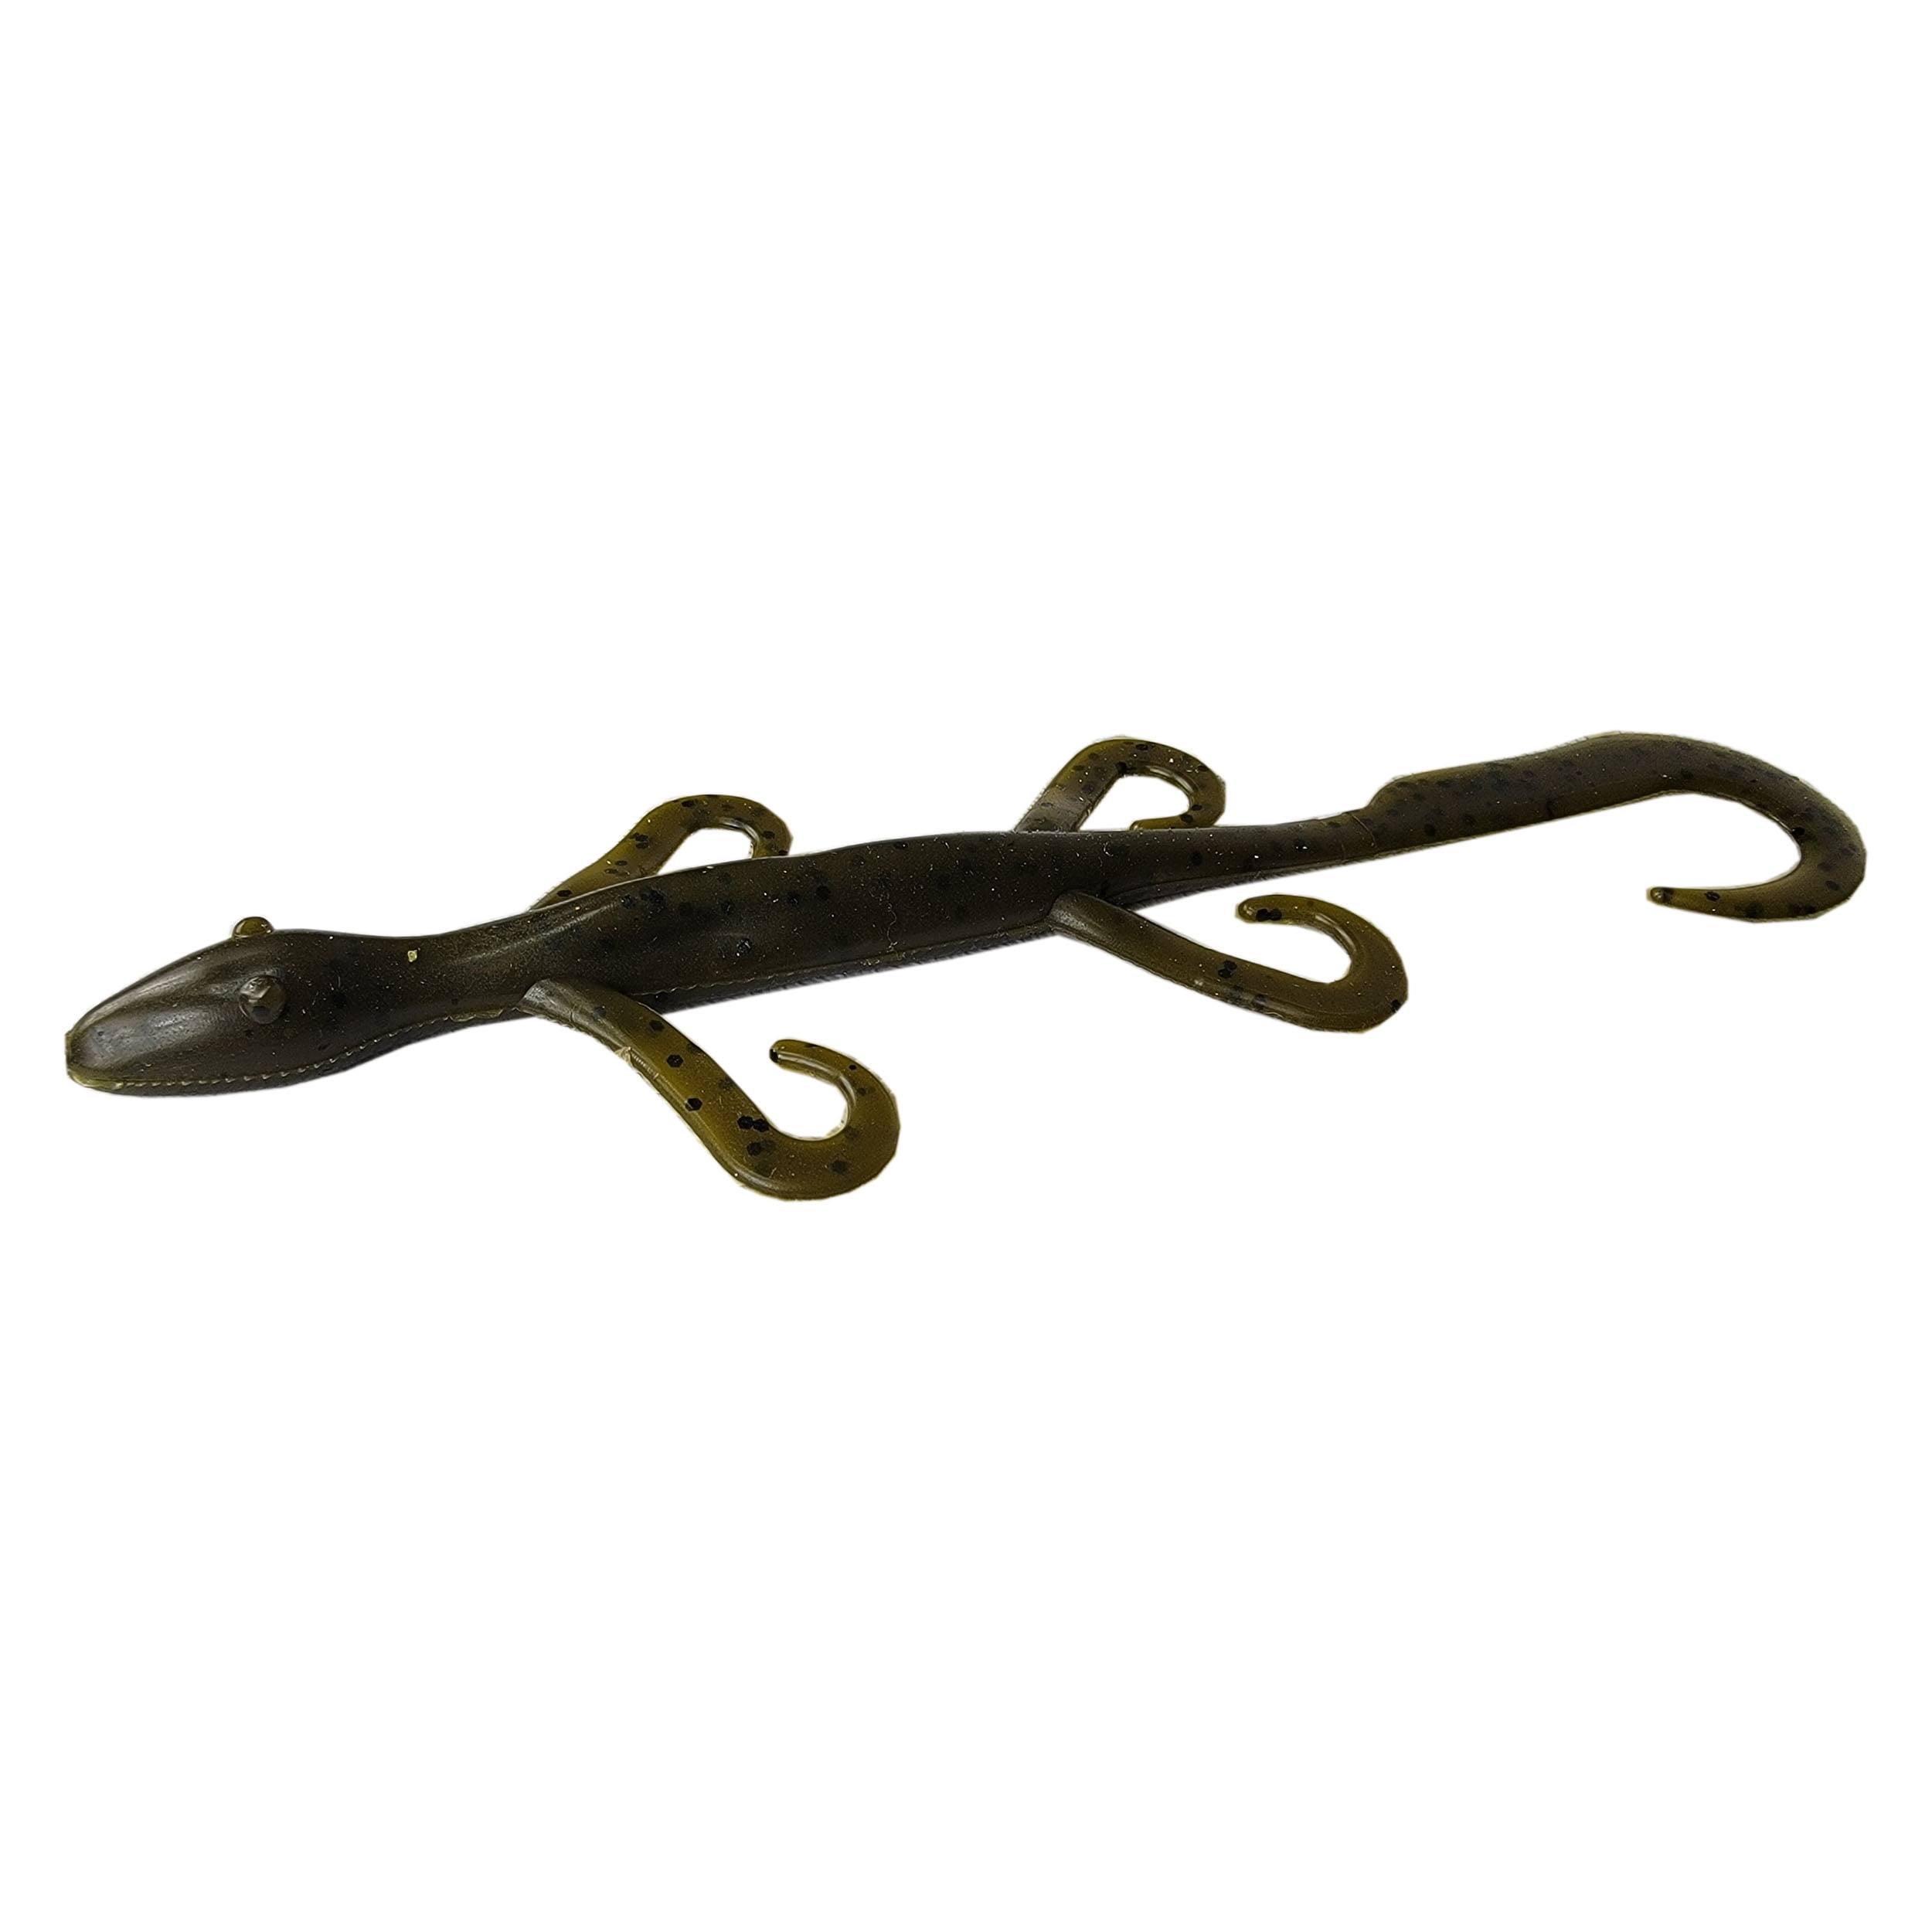 YUM Lizard Ultimate Finesse Lizard Soft Plastic Swim-Bait Bass Fishing Lure  with Curly Legs and Tail